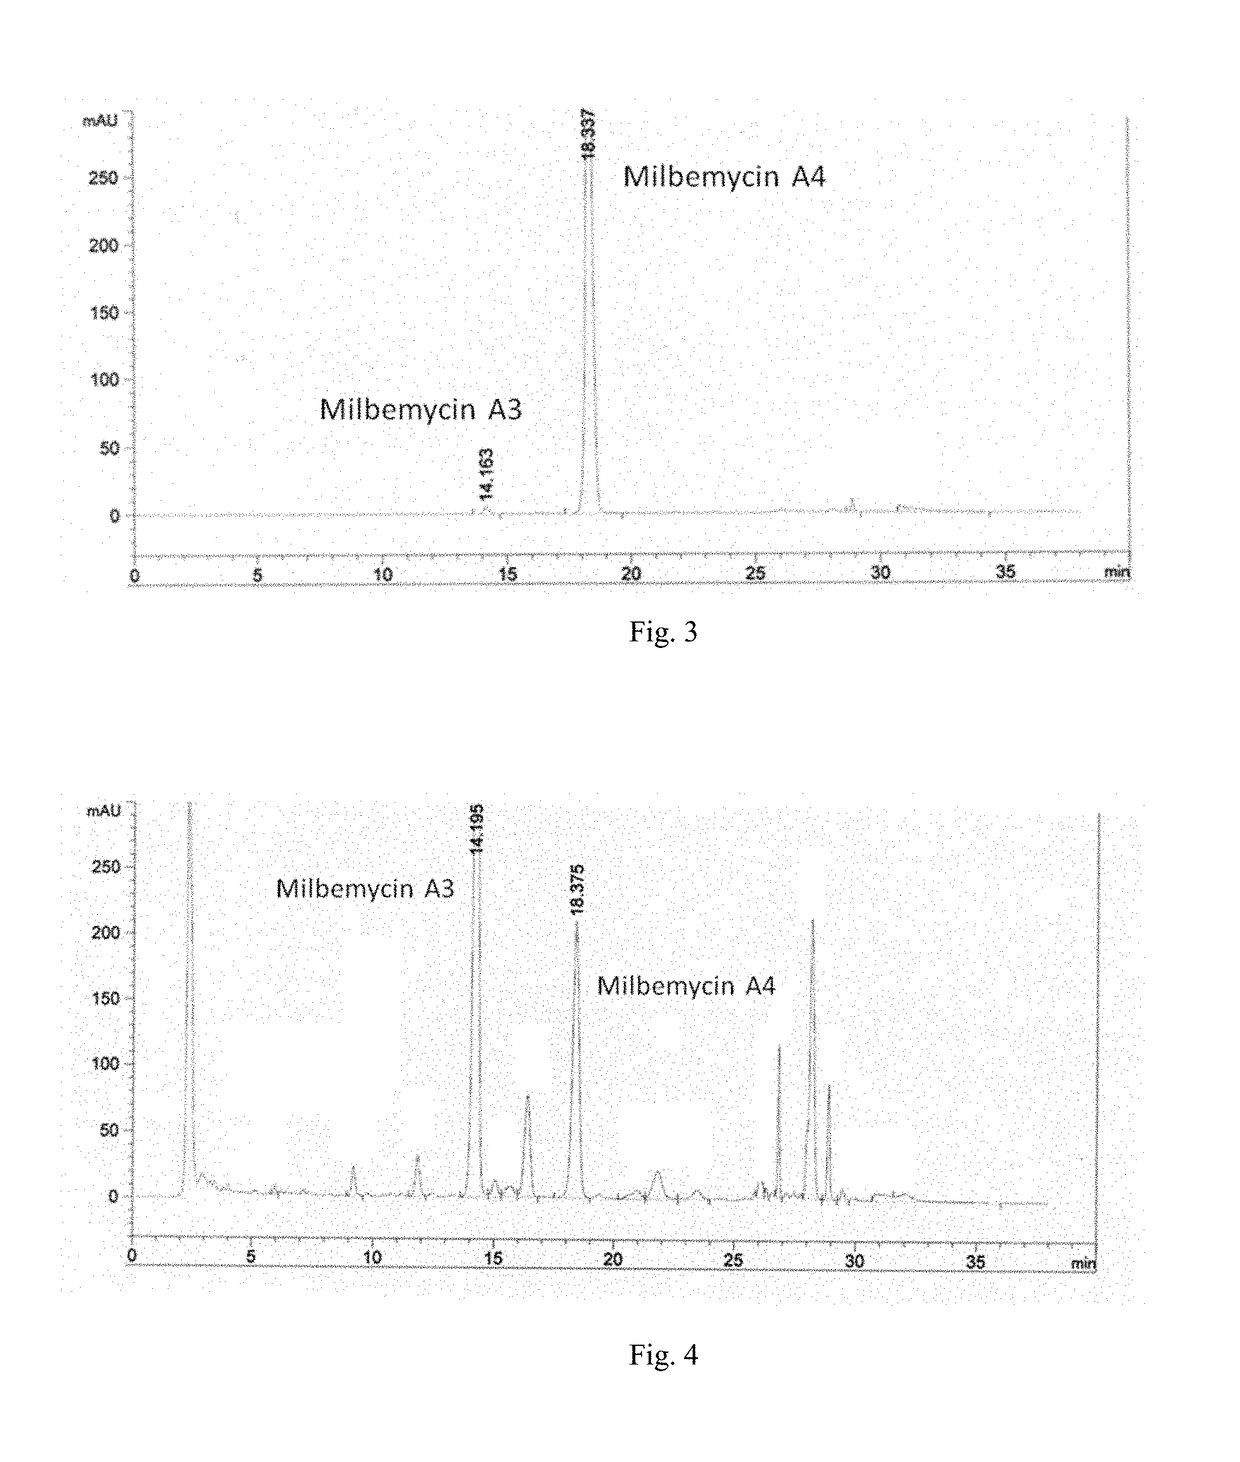 Streptomyces and method for producing milbemycin a3 using same